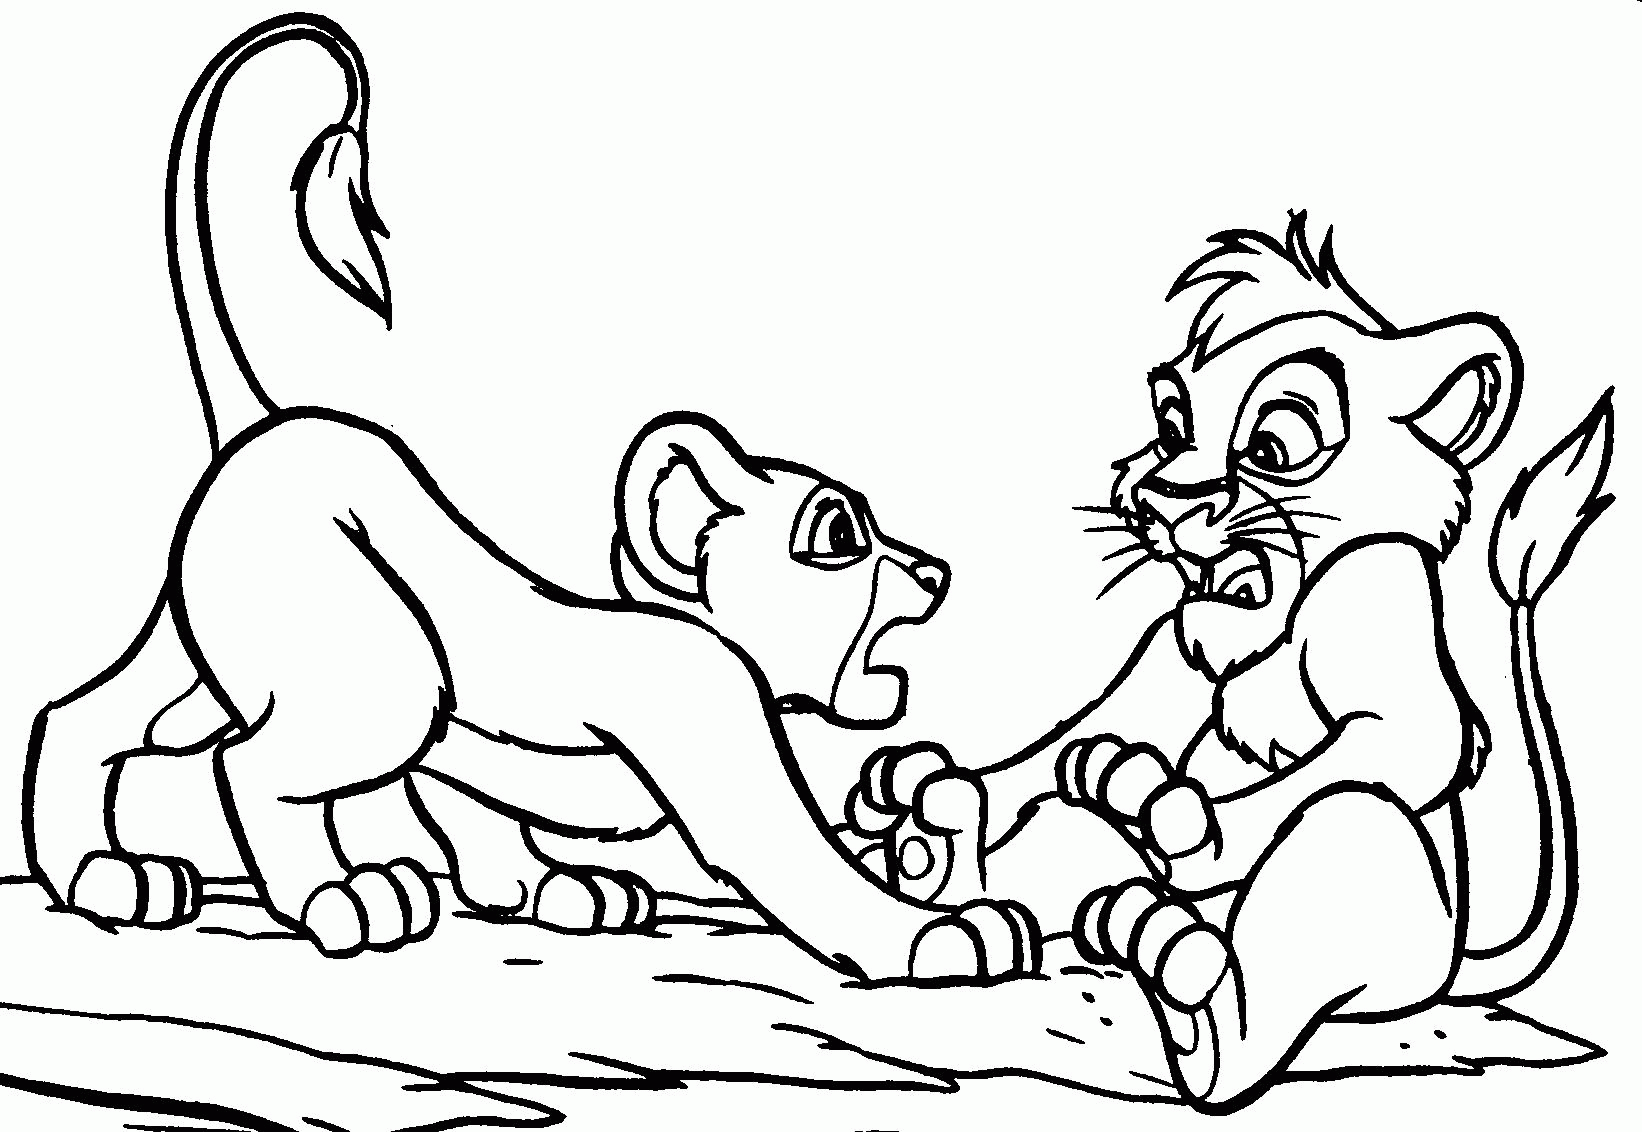 Coloring Pages Of The Lion King 2 - High Quality Coloring Pages